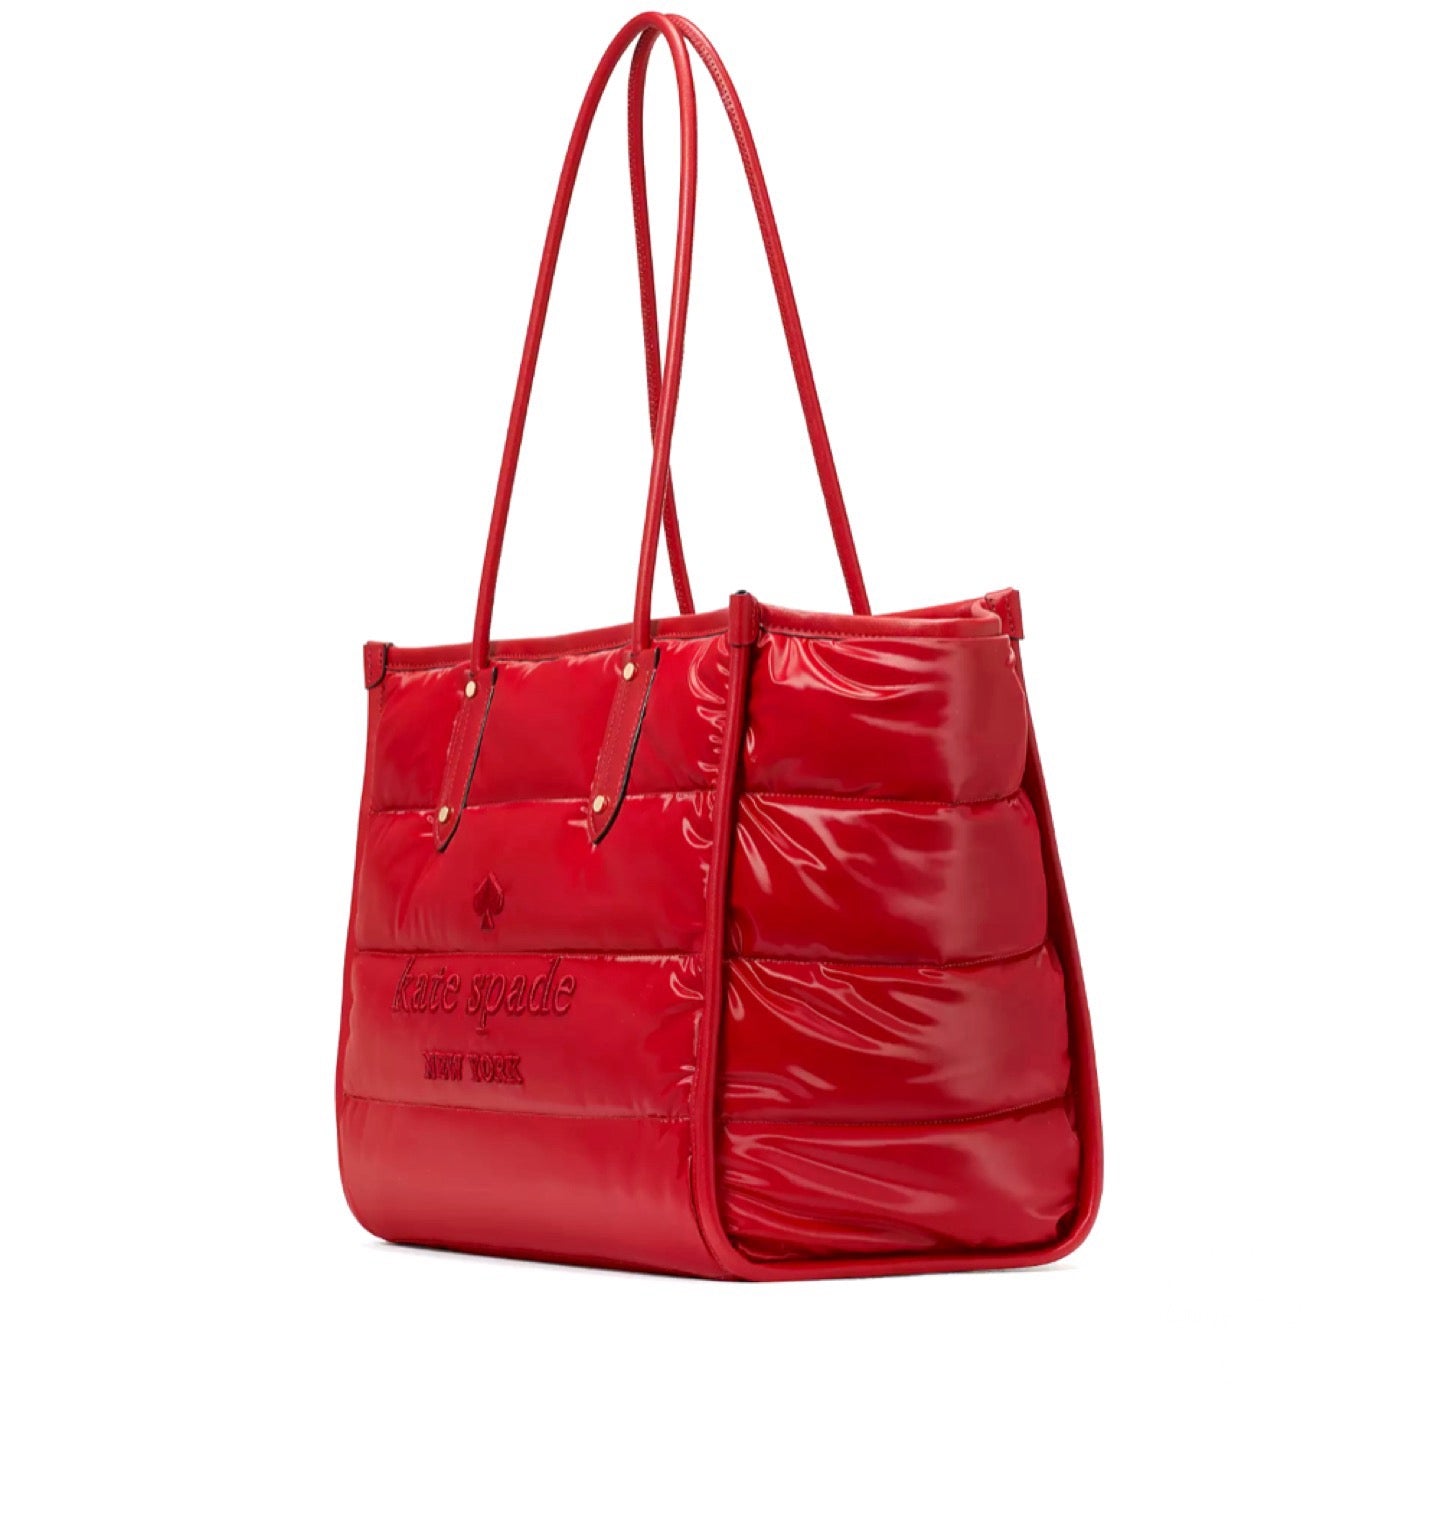 NWT KATE SPADE Ella Extra Large Tote Puffy Nylon Shoulder Bag in Candied Cherry